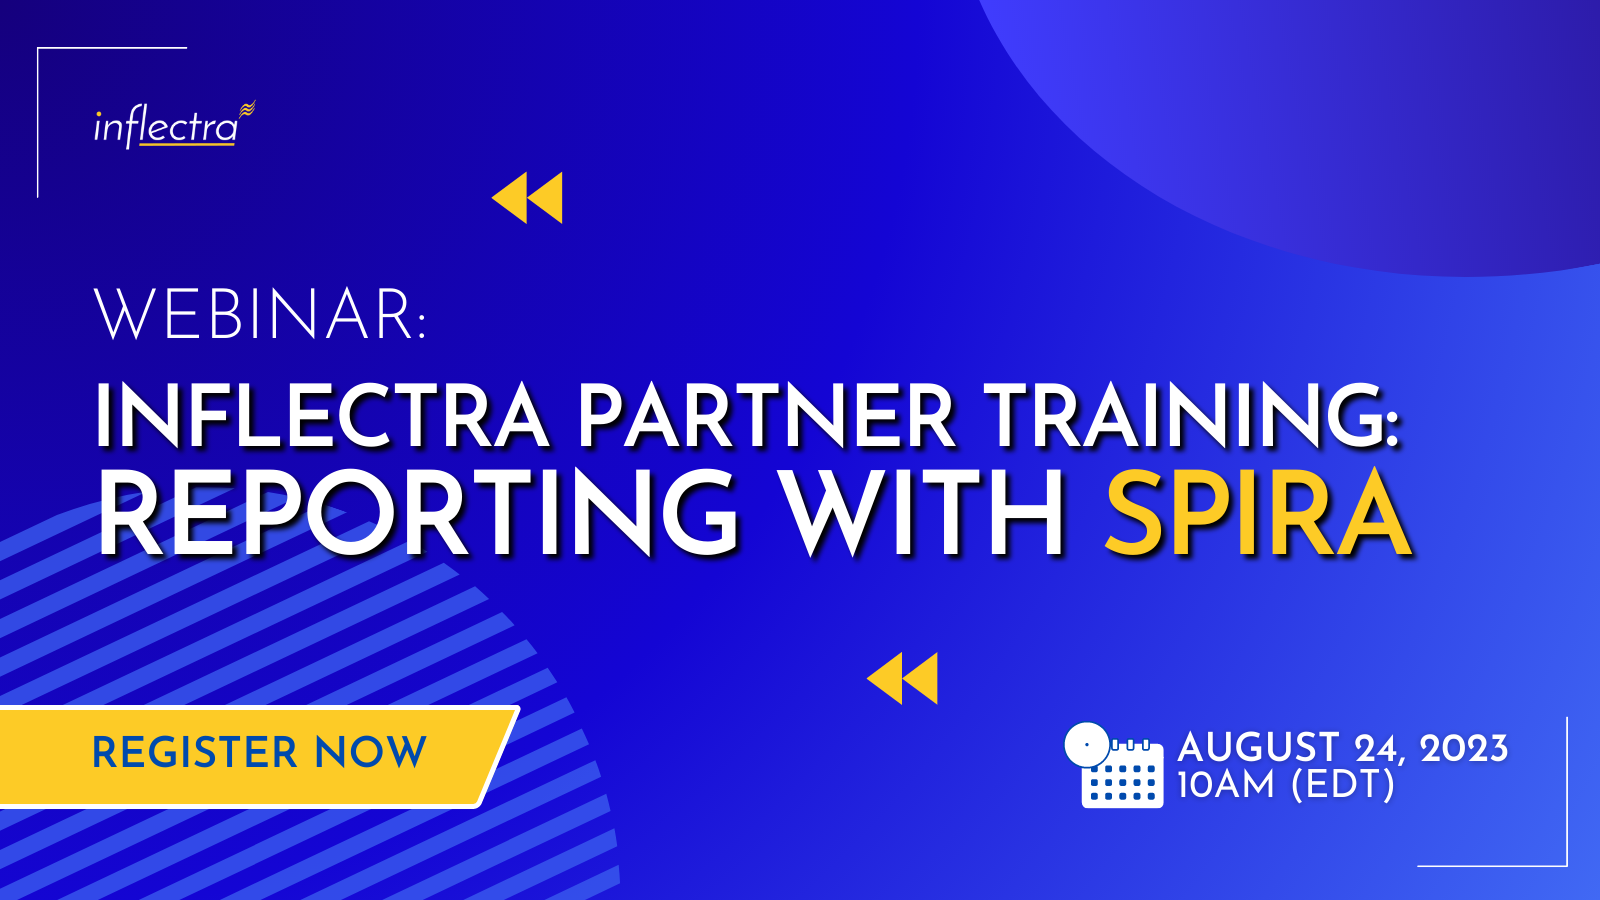 inflectra-partner-webinar-training-reporting-with-spira-image